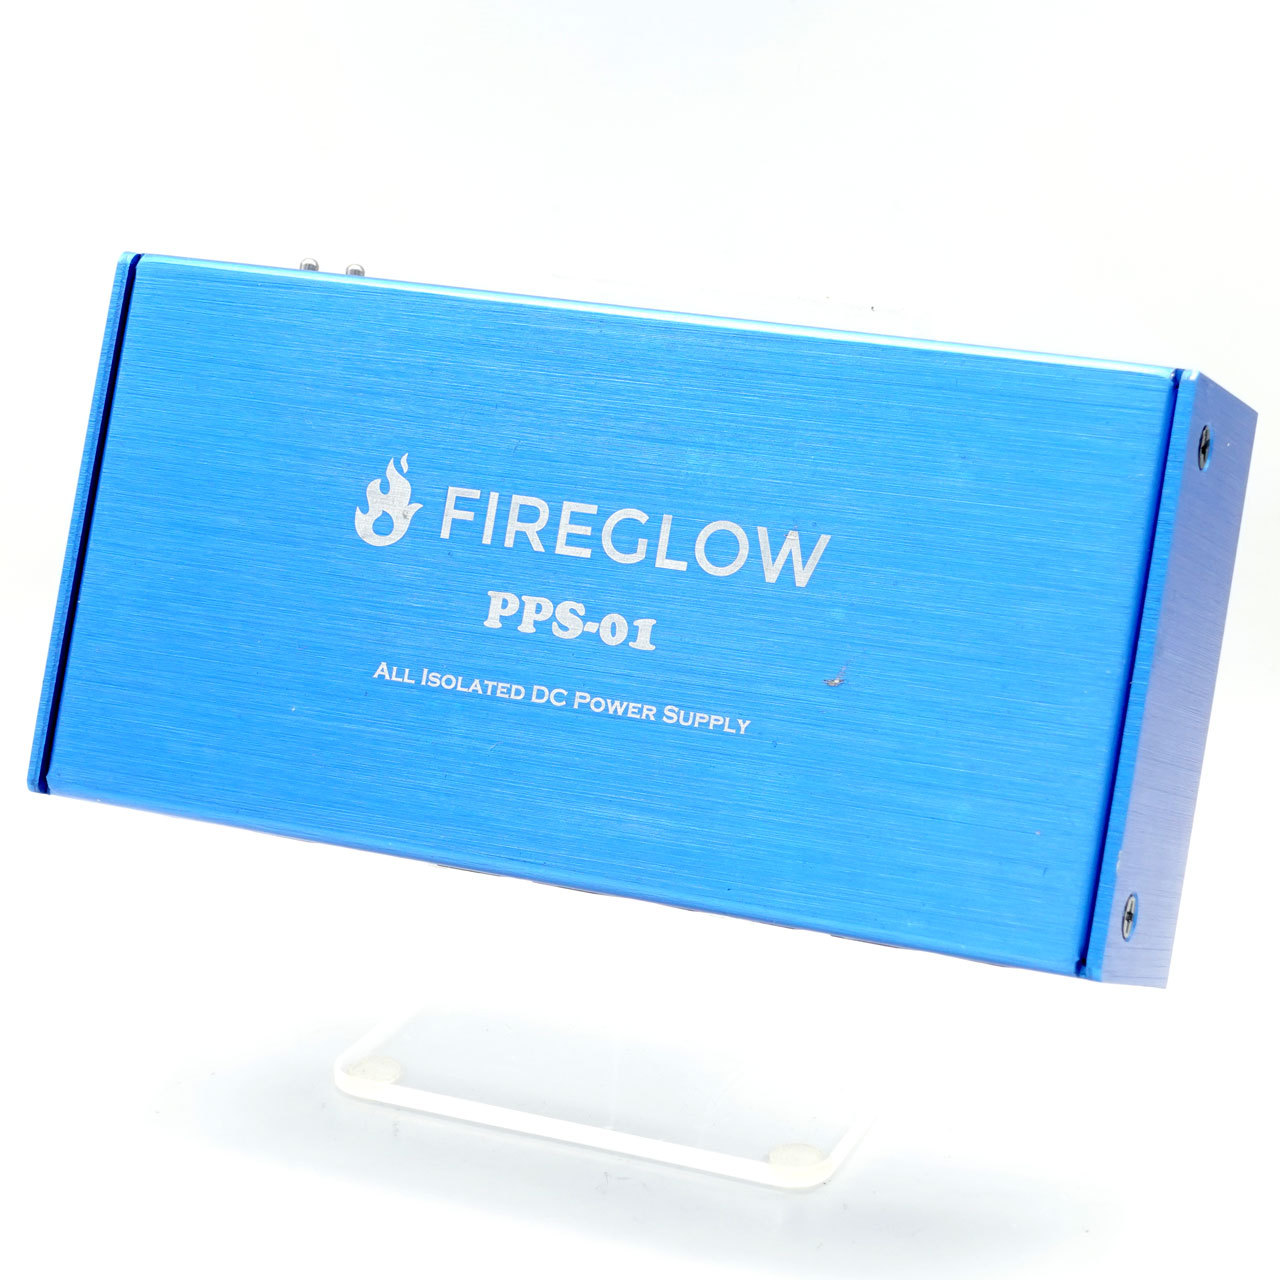 FIREGLOW PPS-01 All Isolated Pedal Power Supply（中古）【楽器検索 